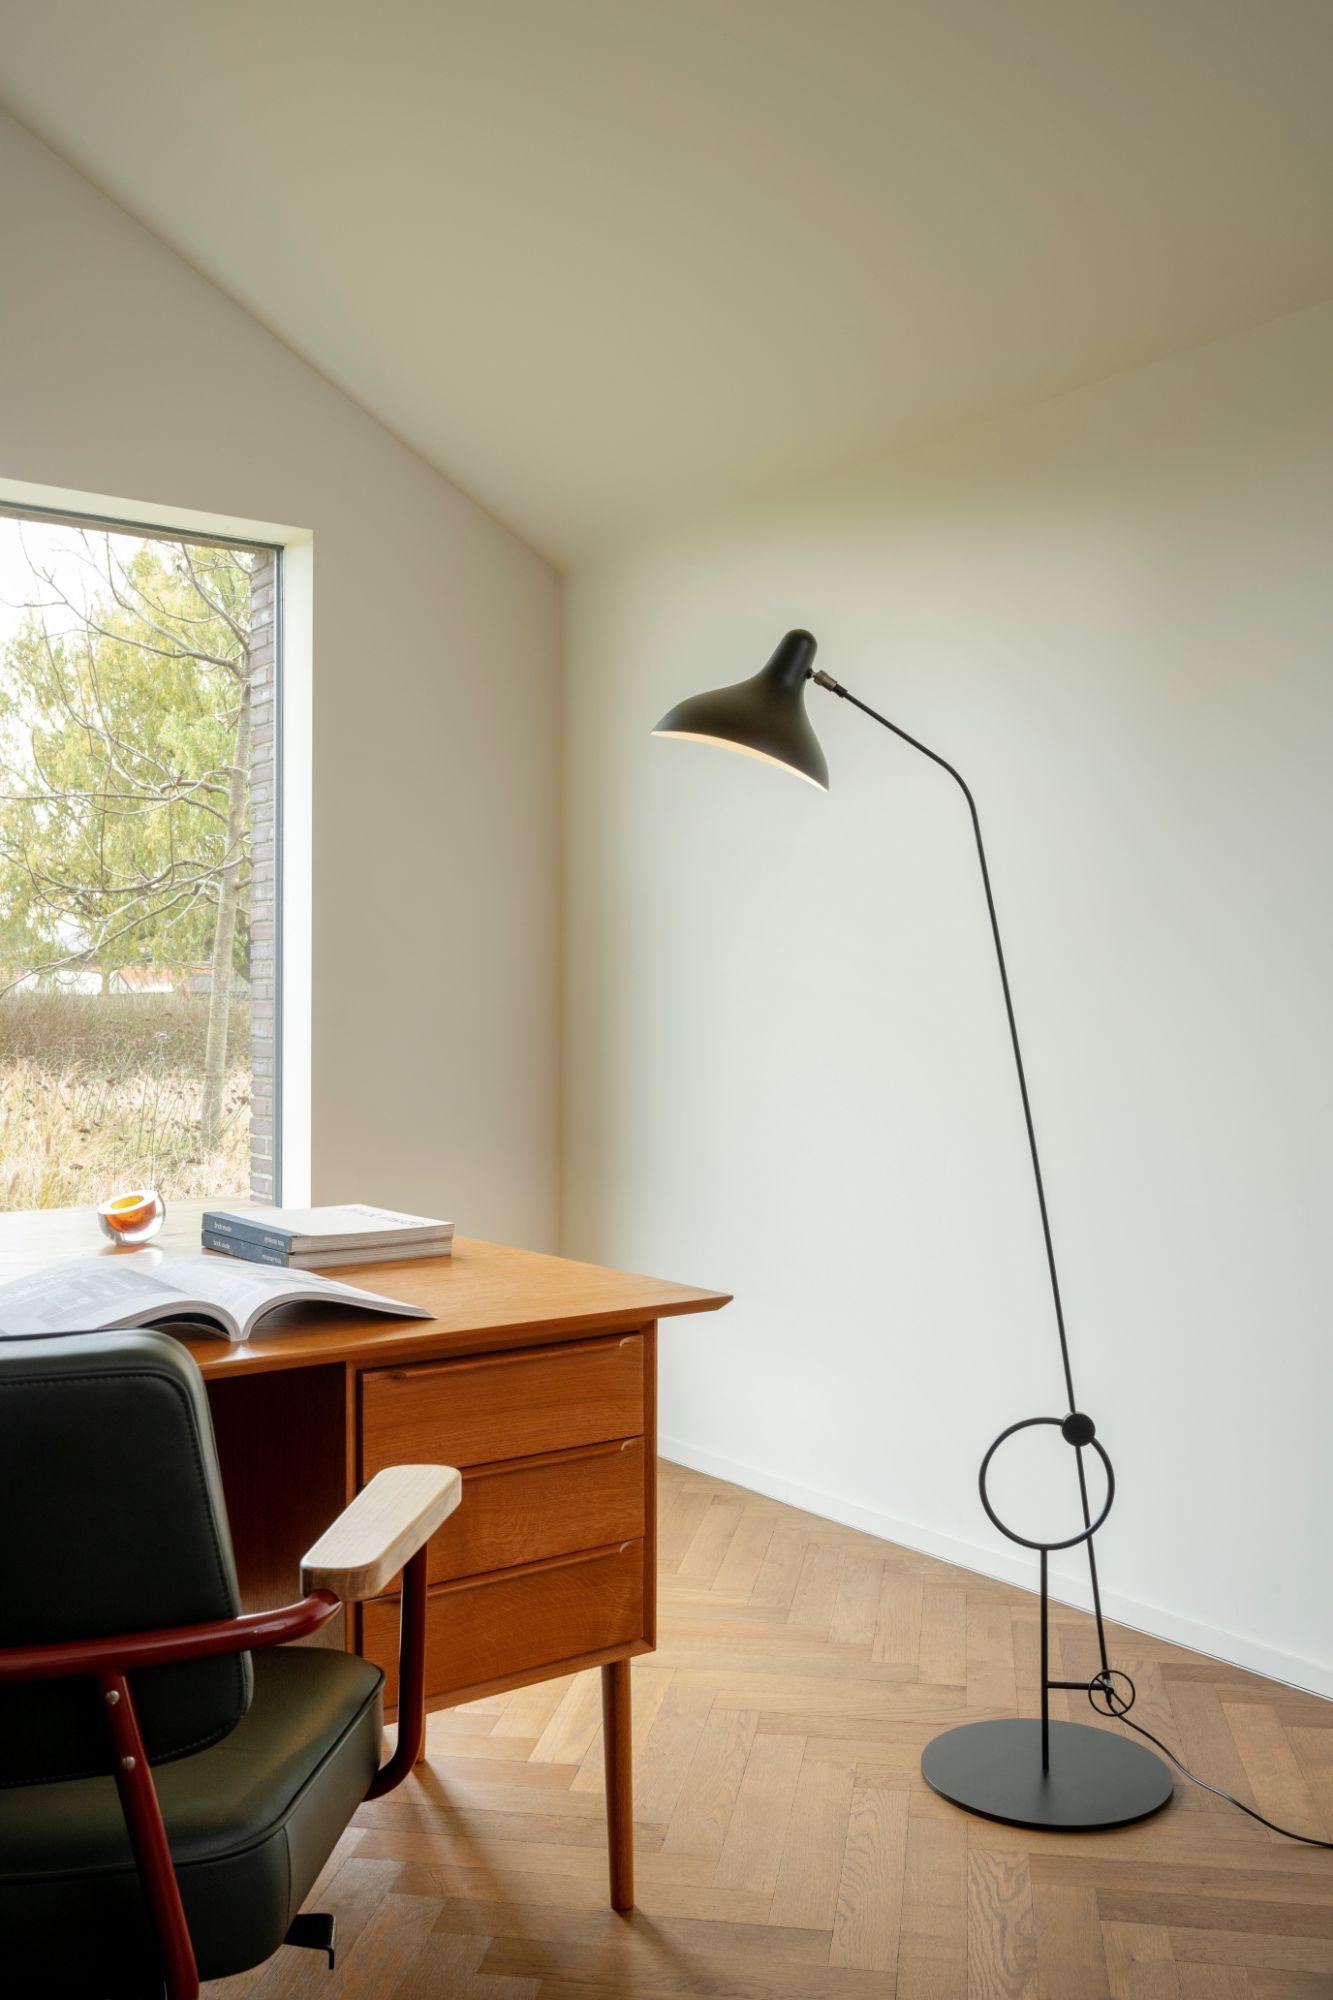 DCW Editions Mantis BS8 L Floor Lamp in Black Steel by Bernard Schottlander
 
 A wired silhouette that naturally evokes a praying mantis in weightlessness, the Mantis floor lamp has been structurally tweaked and improved just as Schottlander